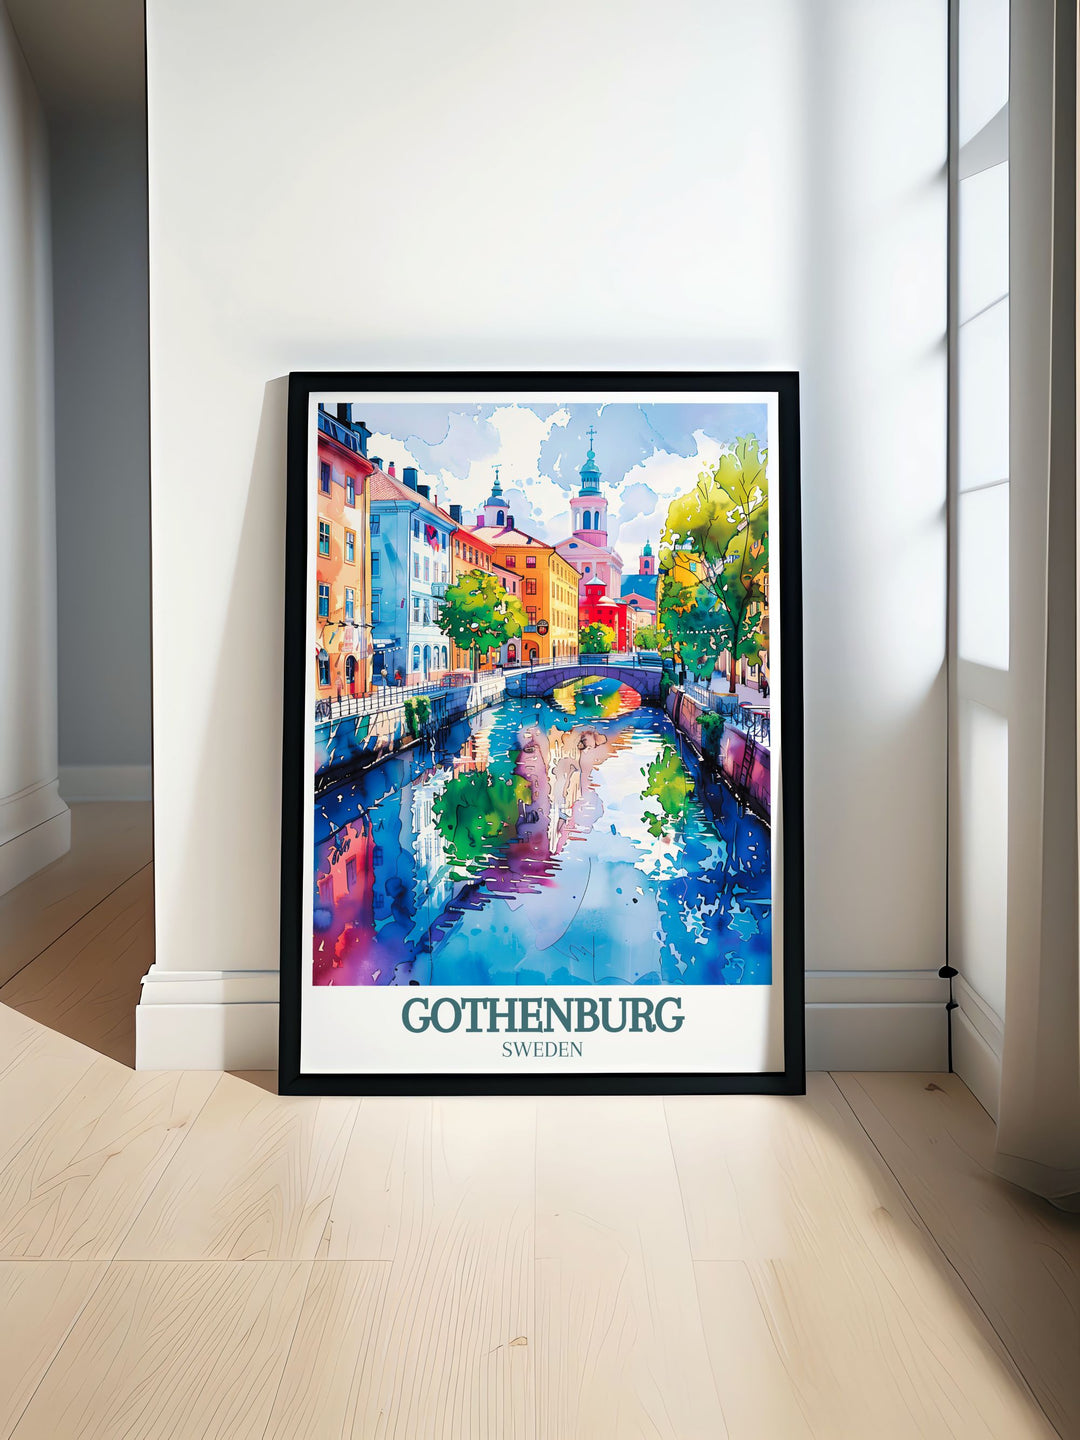 Highlighting the vibrant culture and historical depth of Gothenburg, this poster features the citys iconic landmarks and scenic views. Perfect for those who love urban exploration, this artwork captures the unique spirit of Swedens west coast gem.